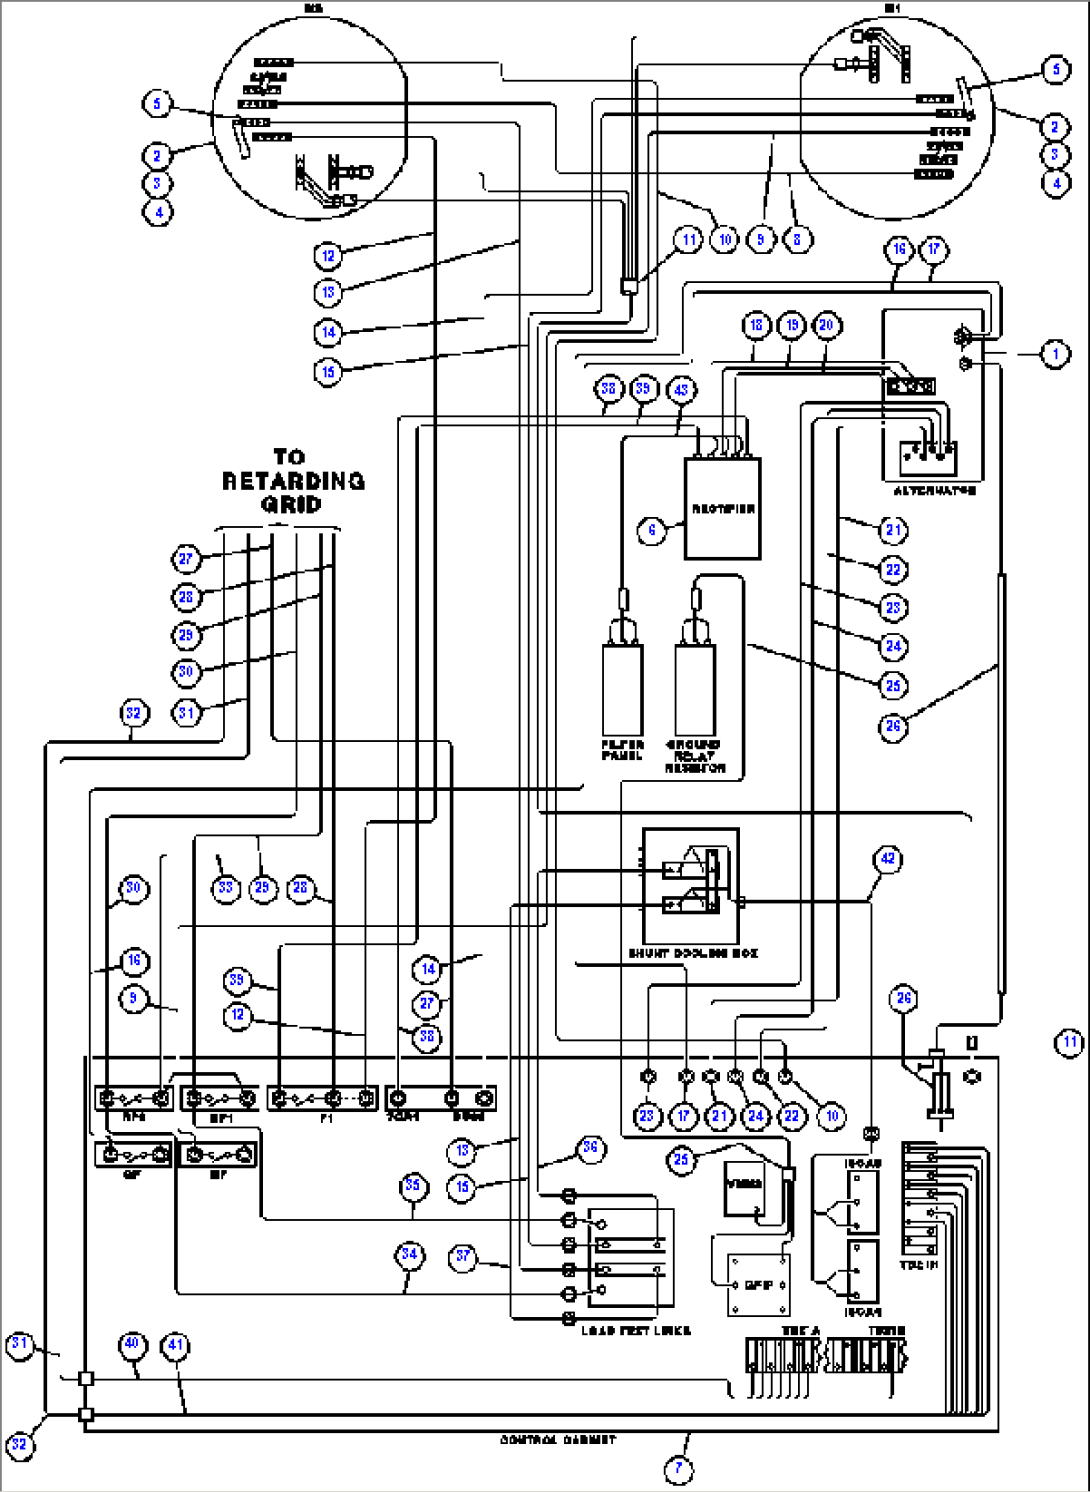 ELECTRIC POWER COMPONENTS WIRING